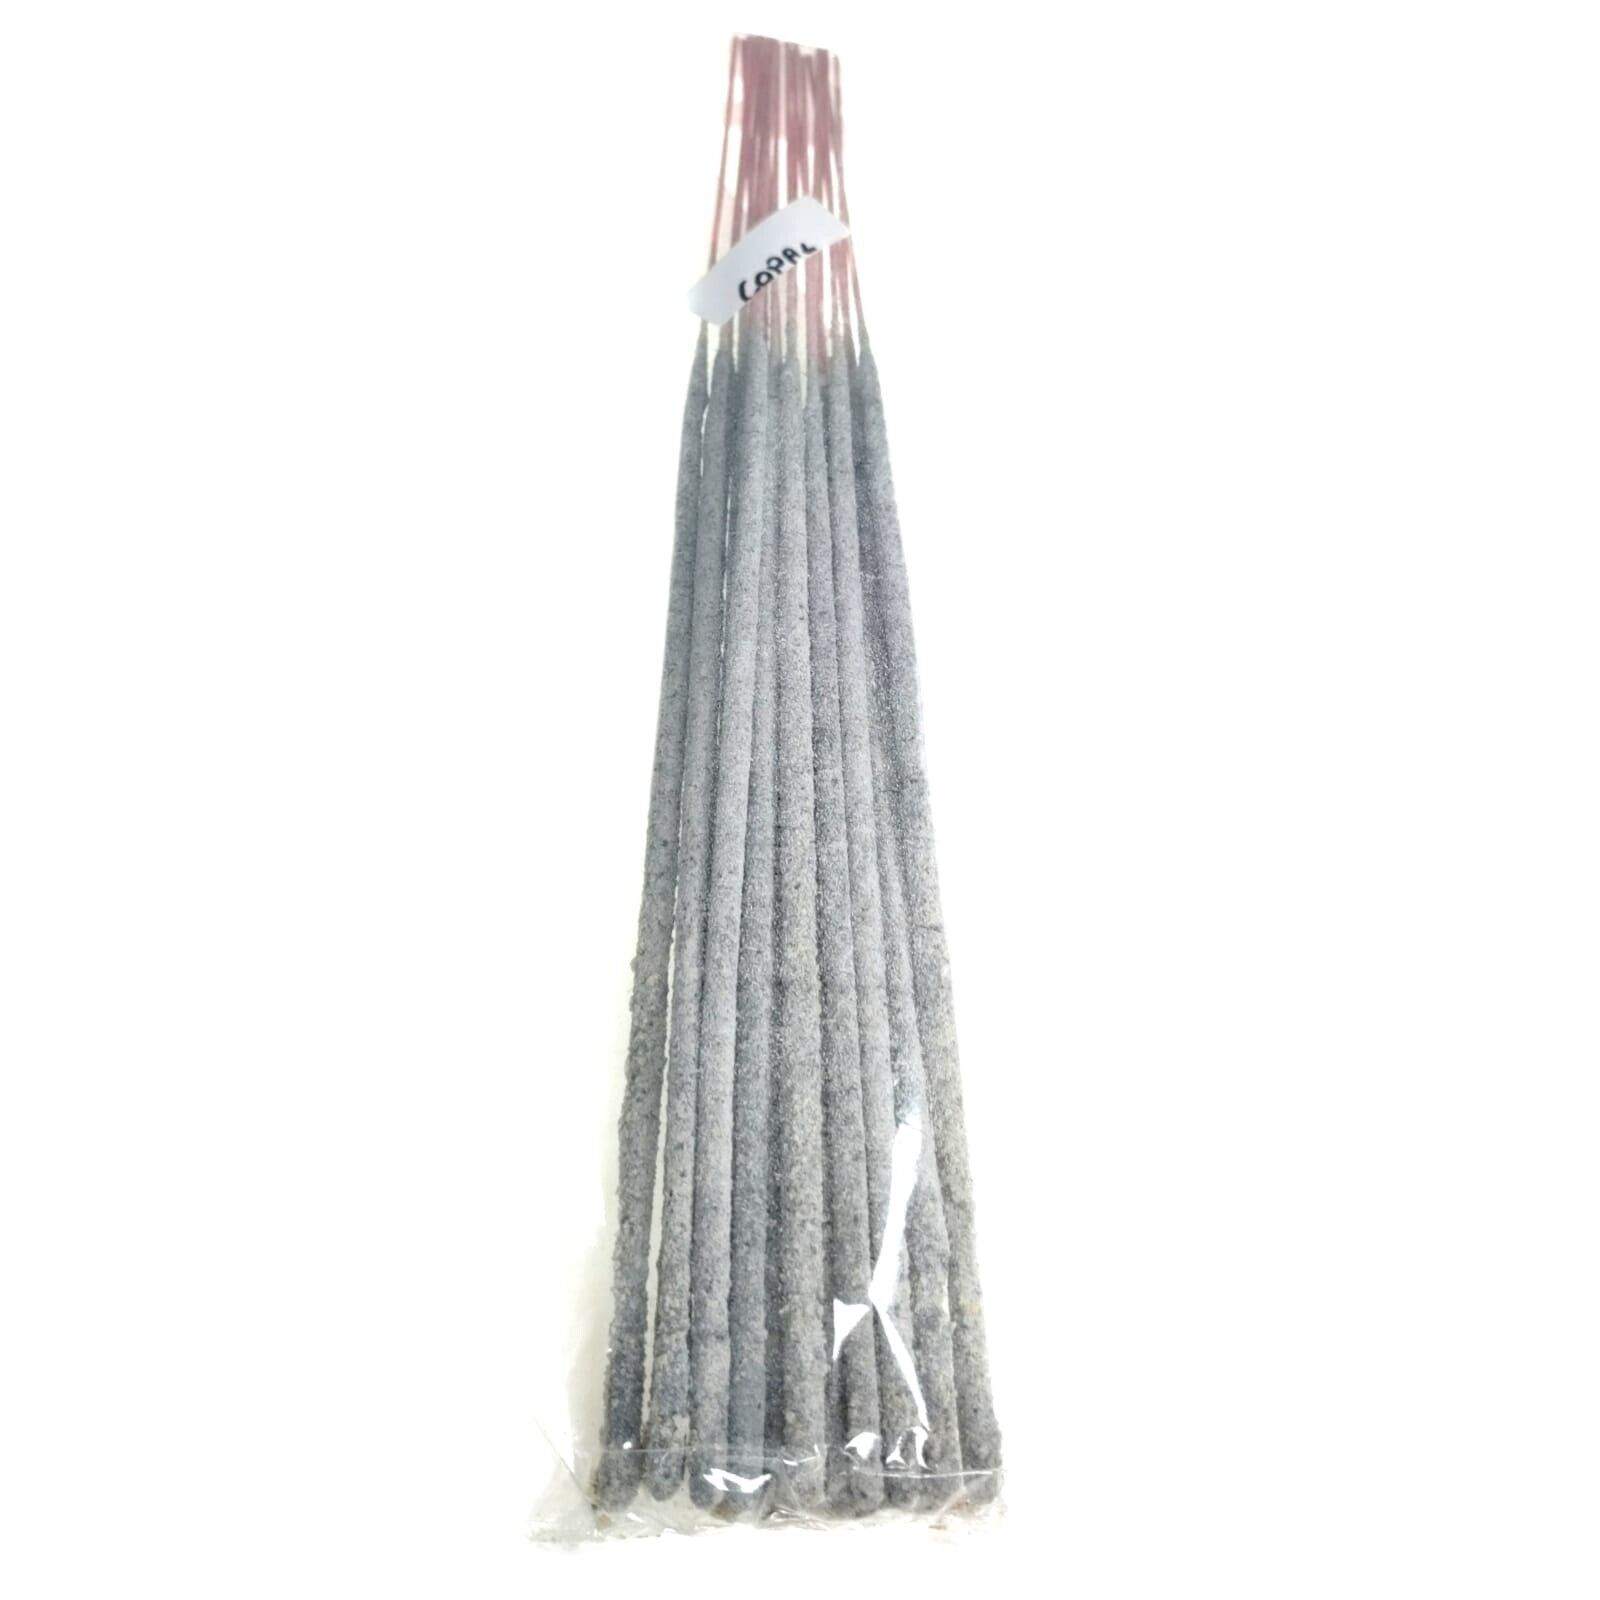 100 Copal Resin Incense Sticks Deluxe  - Authentic Mayan&Aztec Ritual Experience